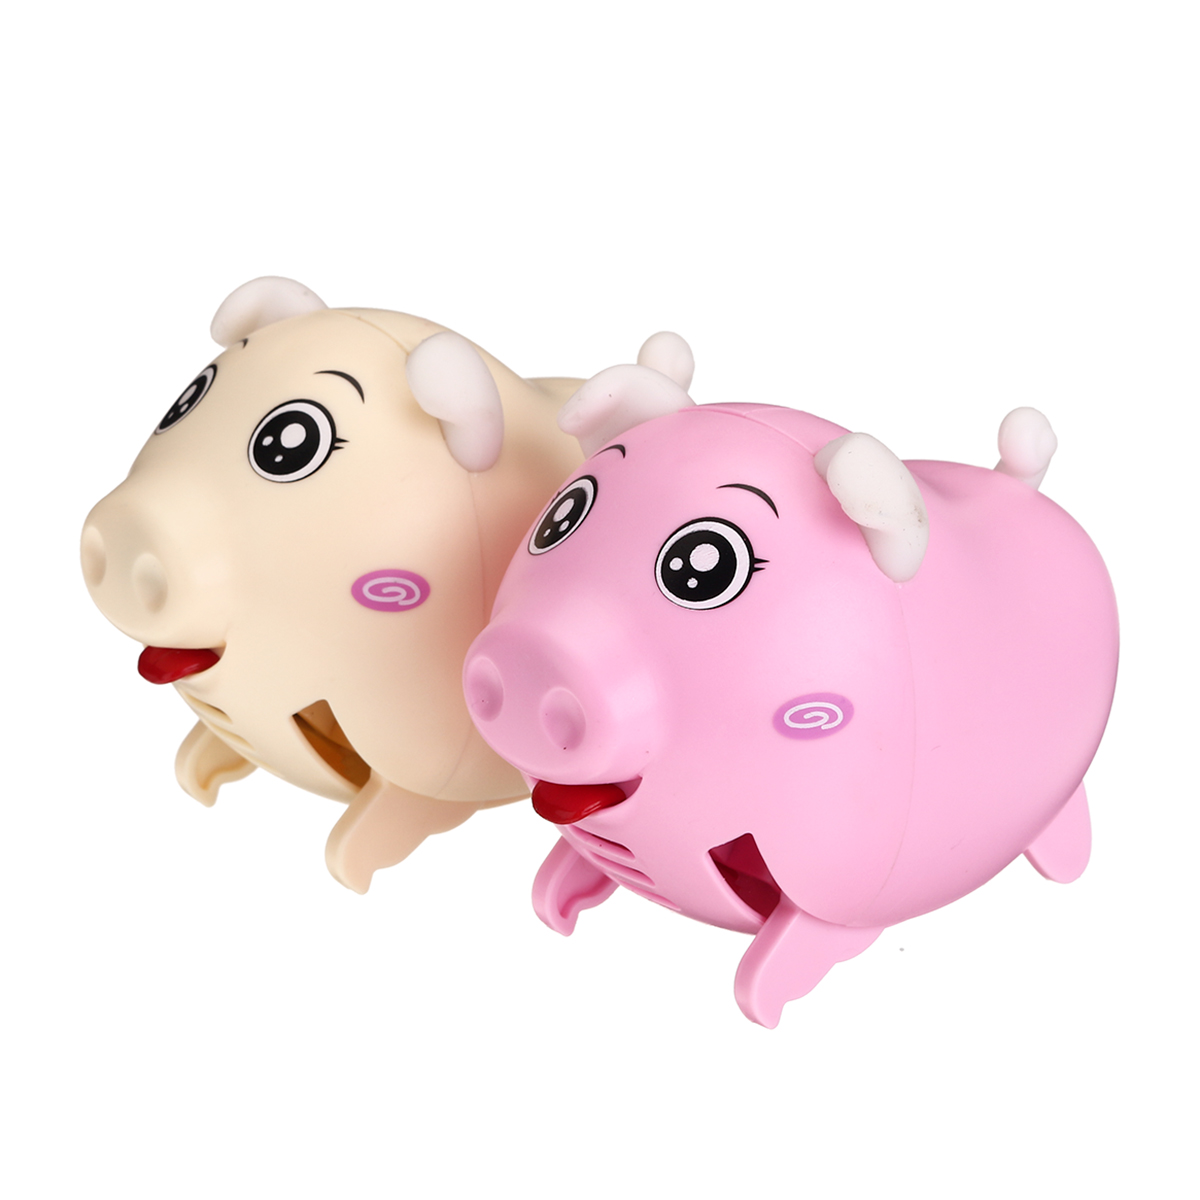 Kids-Toys-Animals-Sound-Induction-Whistling-Pig-Electronic-Pig-Interactive-Walking-Electronic-Toy-1662056-4